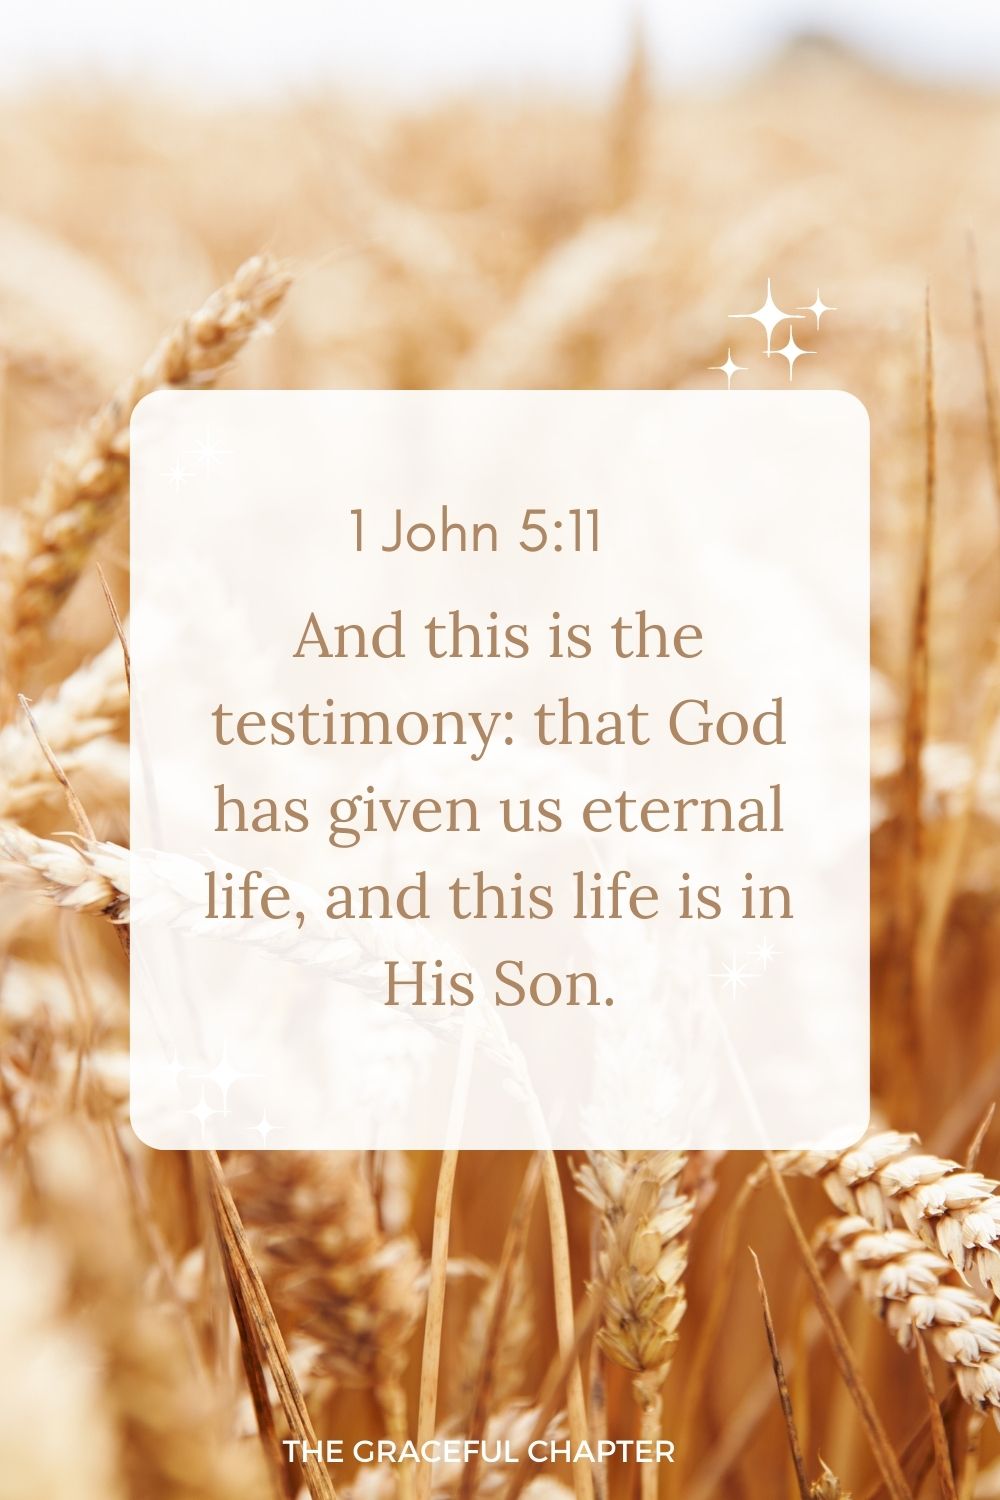 And this is the testimony: that God has given us eternal life, and this life is in His Son. 1 John 5:11